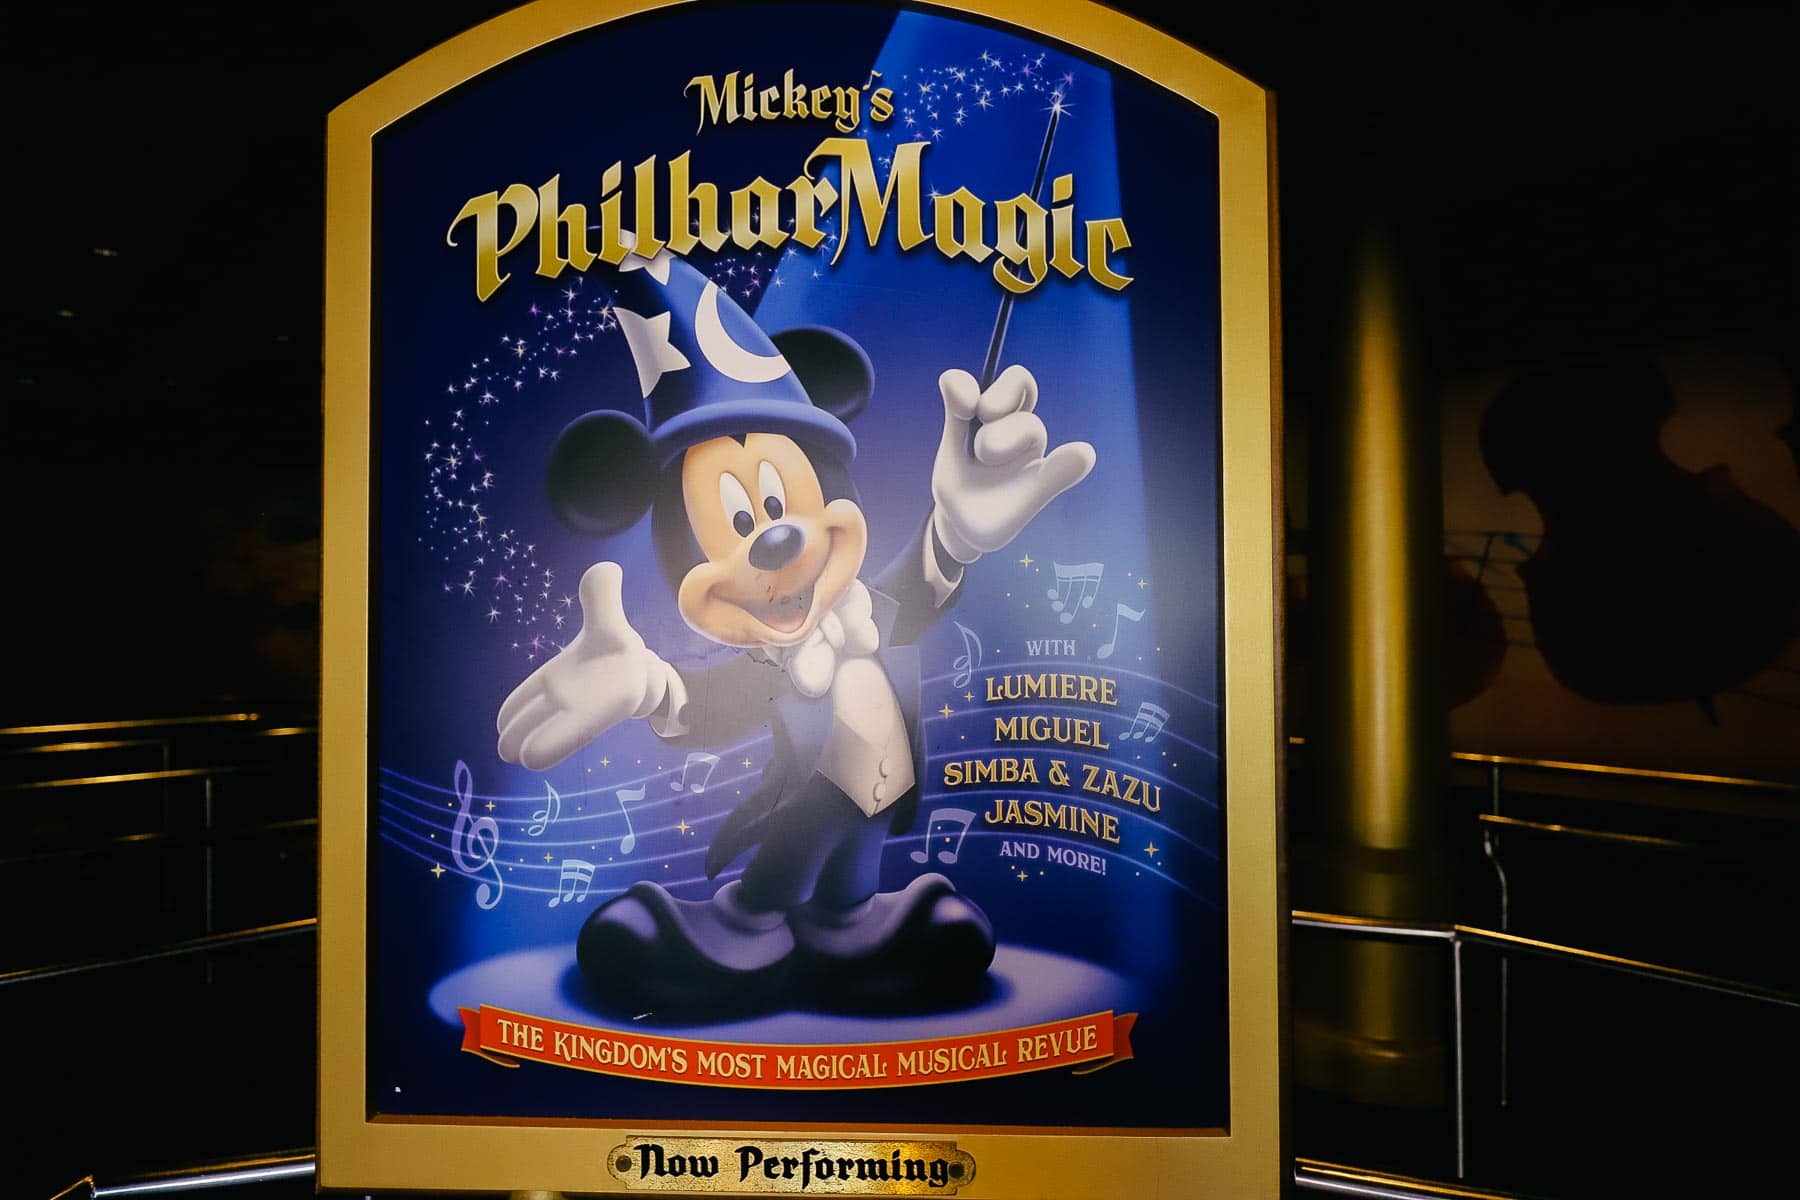 Mickey's PhilharMagic attraction poster 